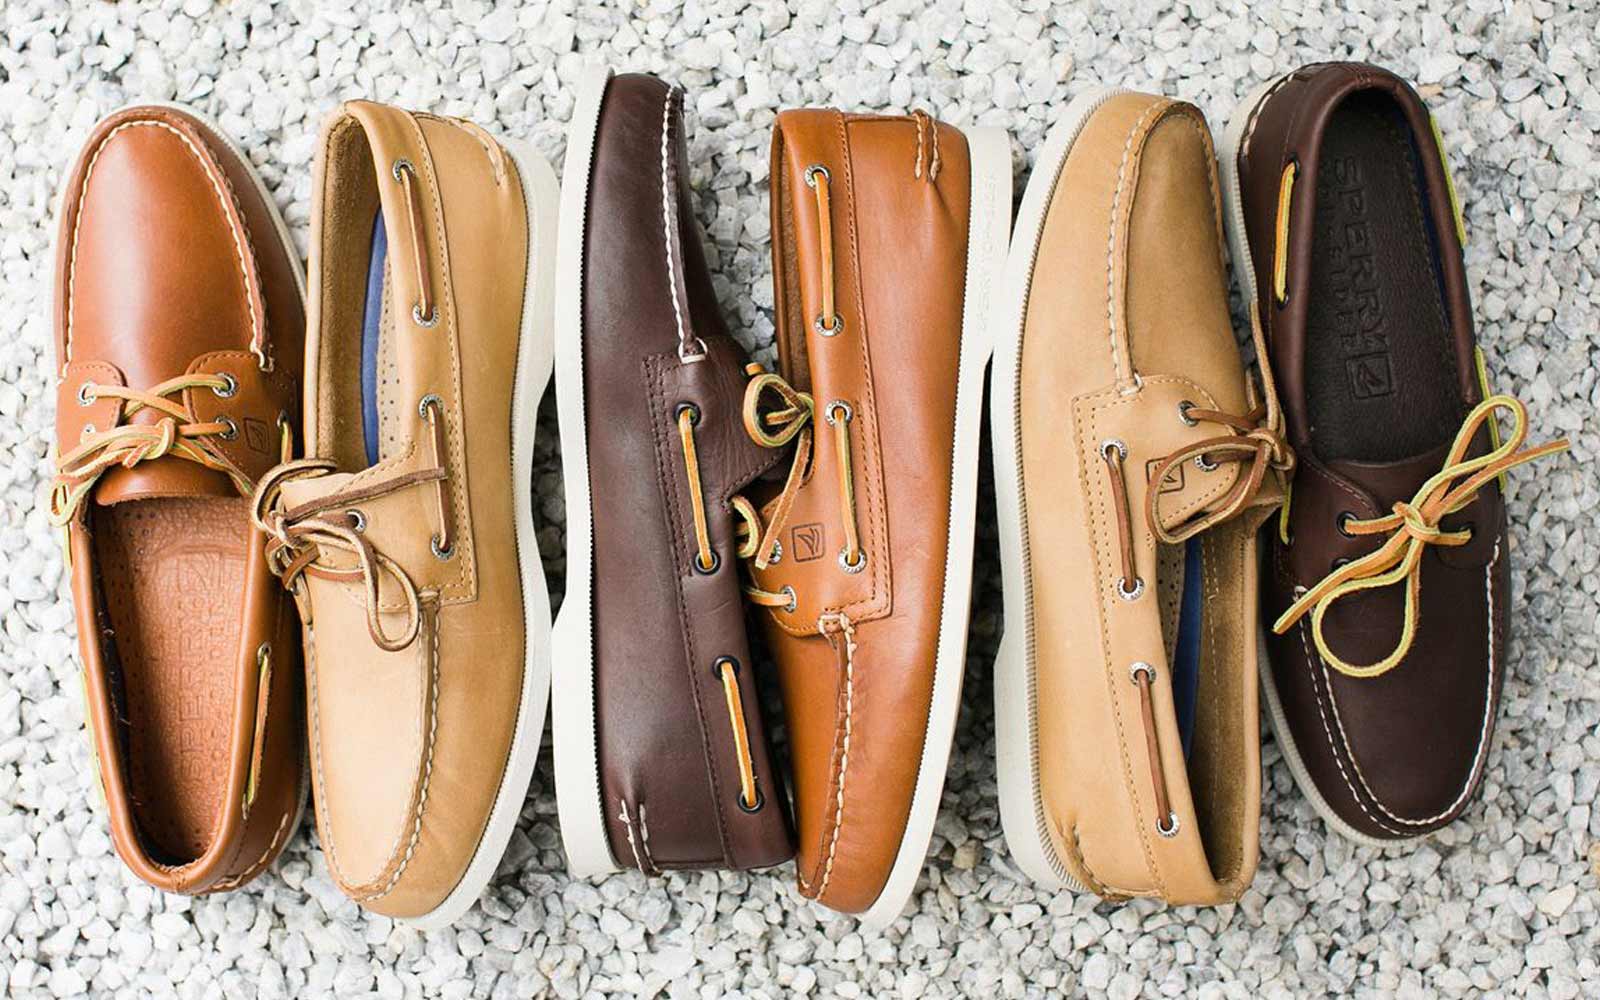 Various boat shoes